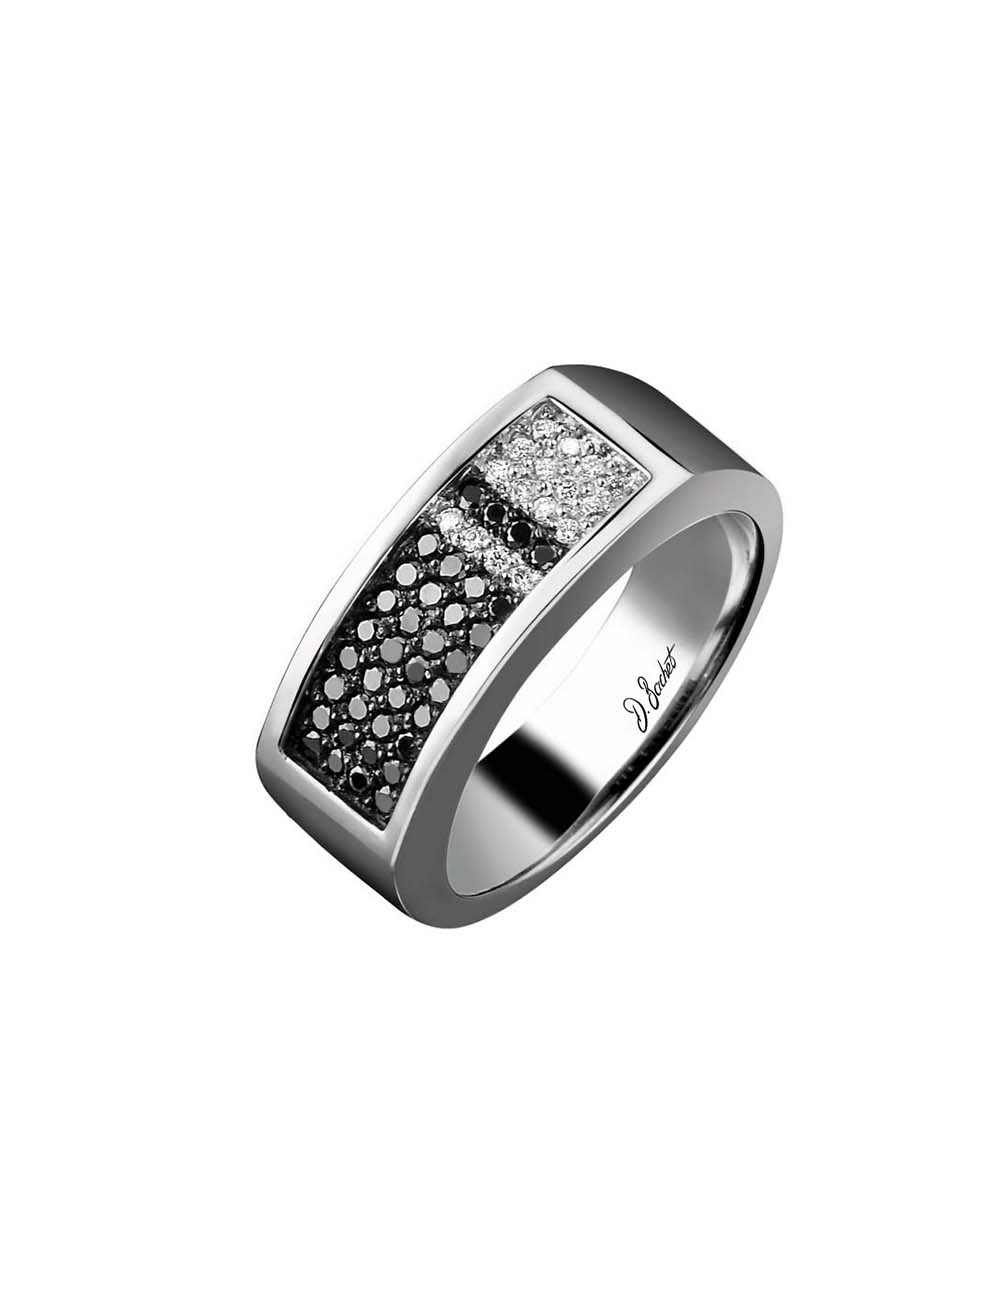 Platinum signet ring with 52 white and black diamonds, embodying strength and confidence, perfect for the audacious man.